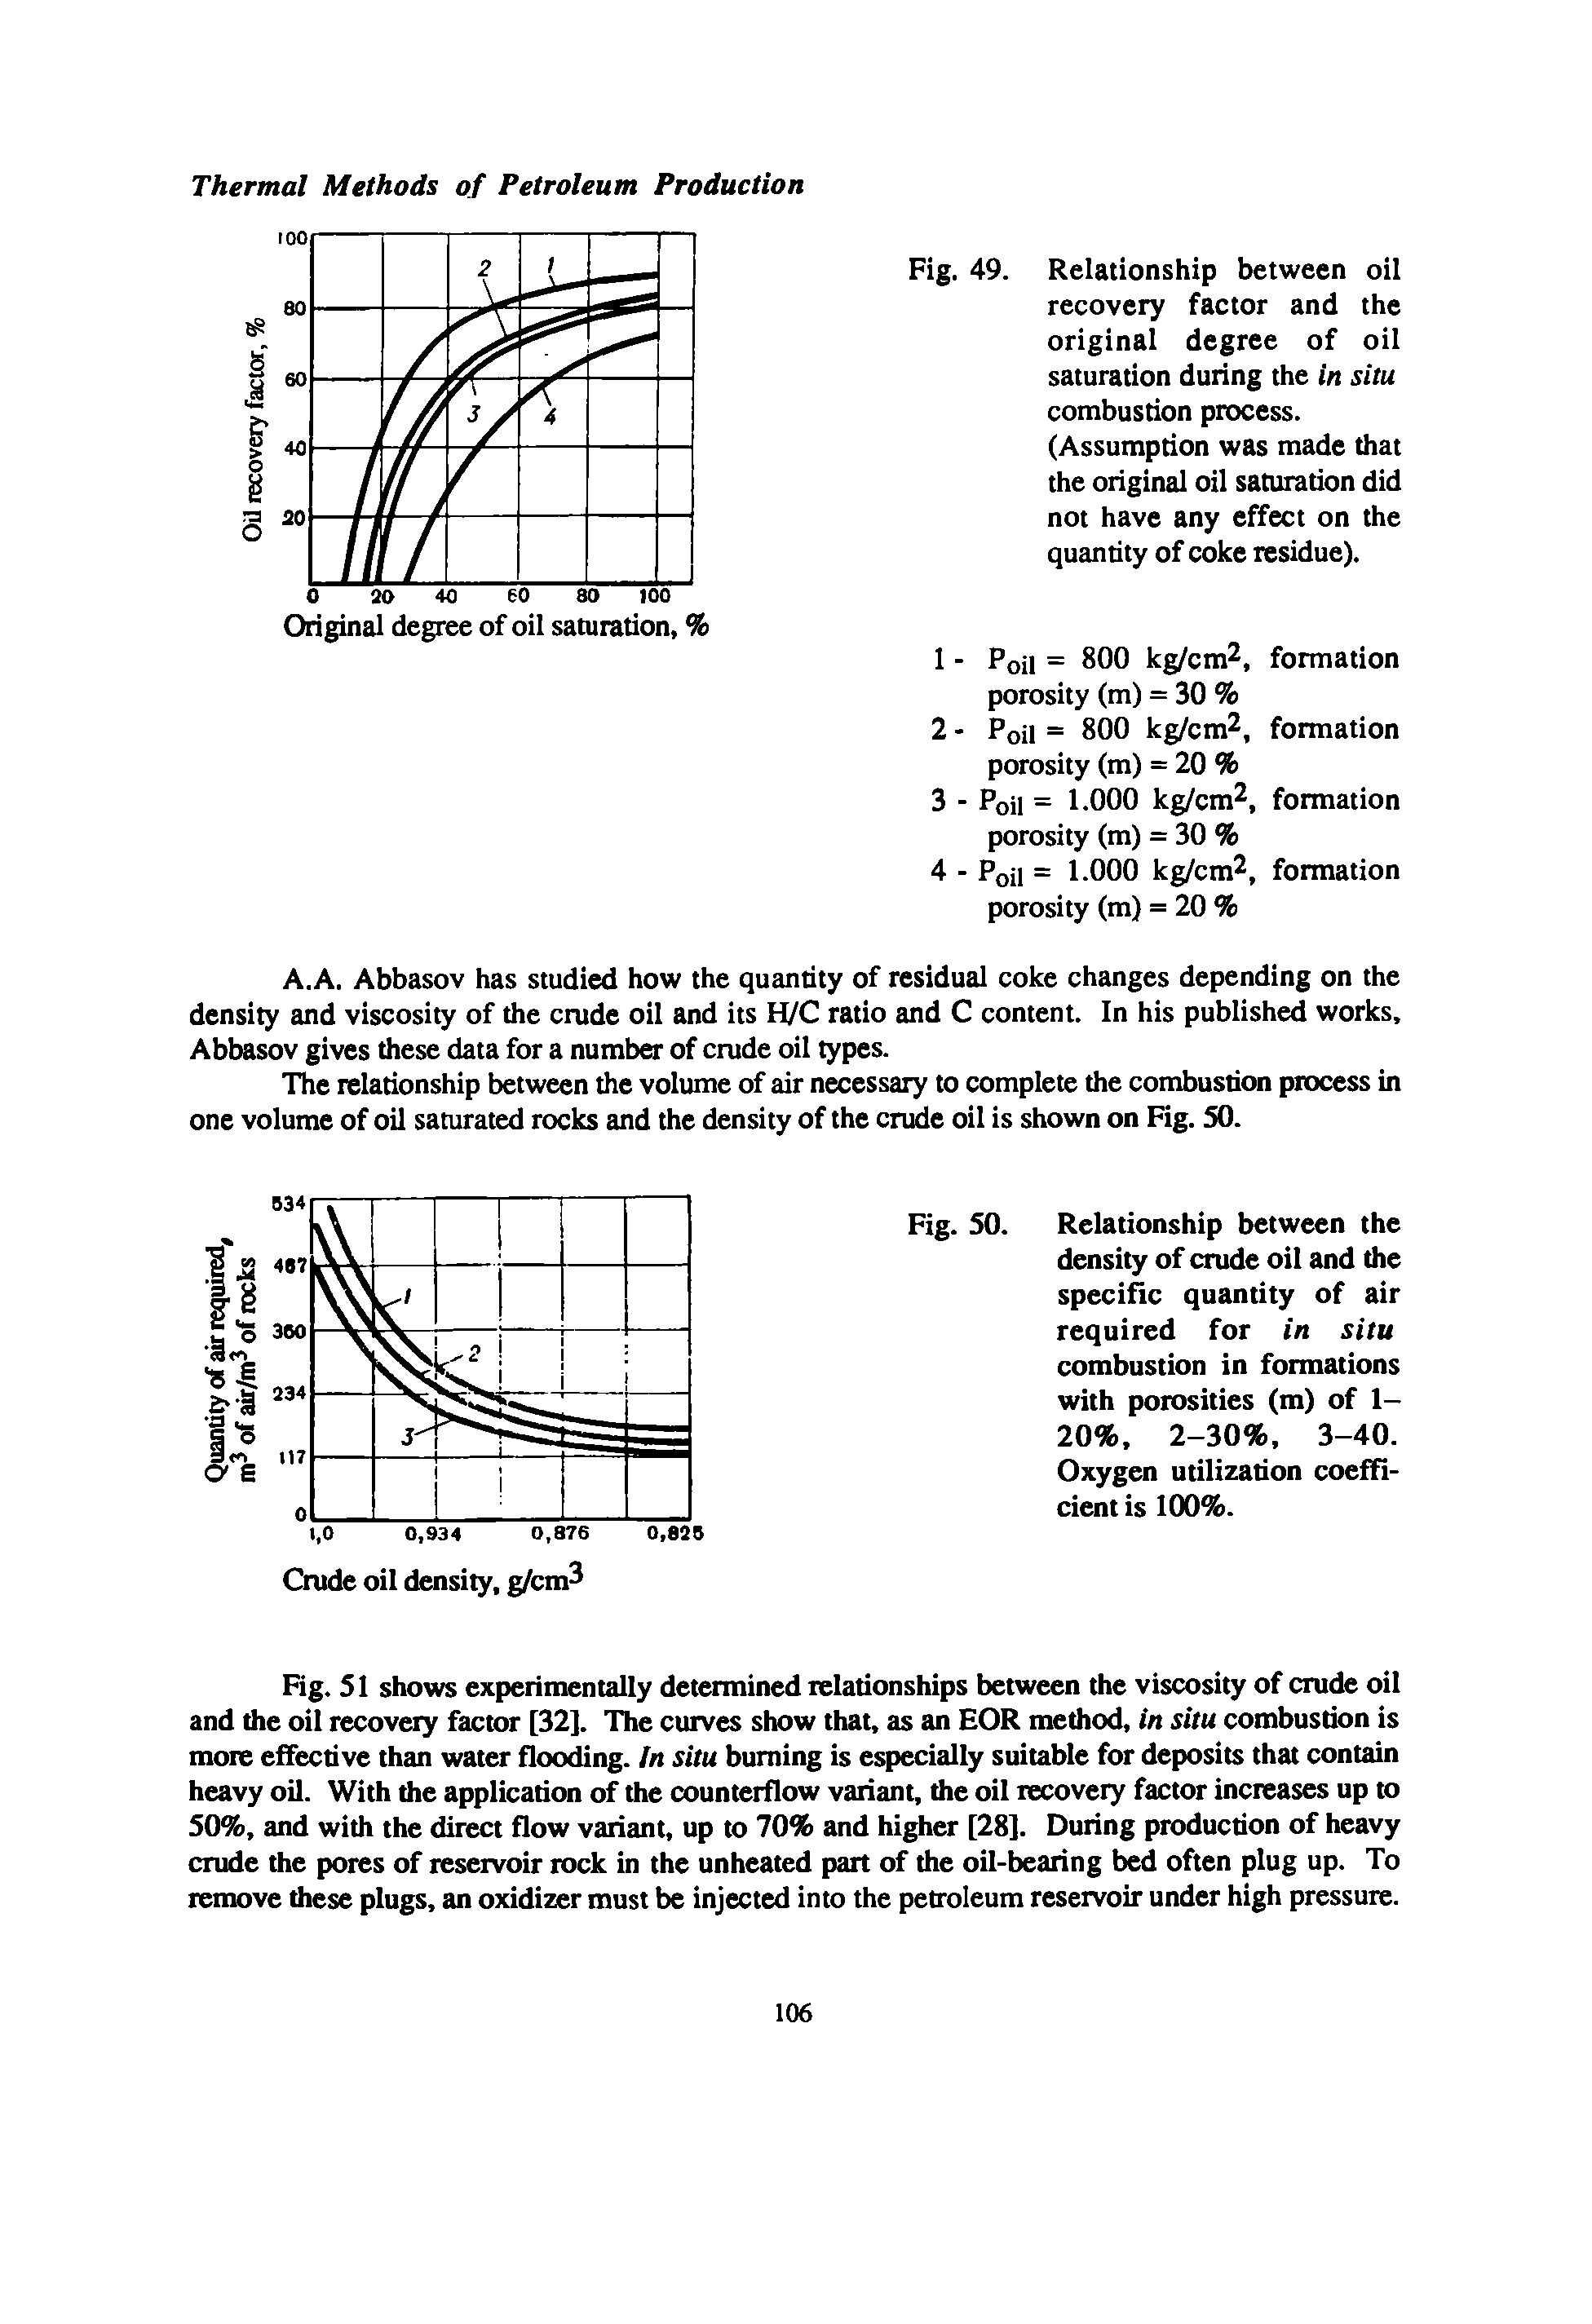 Fig. SI shows experimentally determined relationships between the viscosity of crude oil and the oil recovery factor [32]. The curves show that, as an EOR method, in situ combustion is more effective than water flooding. In situ burning is especially suitable for deposits that contmn heavy oil. With the application of the counterflow variant, the oil recovery factor increases up to S0%, and with the direct flow variant, up to 70% and higher [28]. During production of heavy crude the pores of reservoir rock in the unheated part of the oil-bearing bed often plug up. To remove these plugs, an oxidizer must be injected into the petroleum reservoir under high pressure.